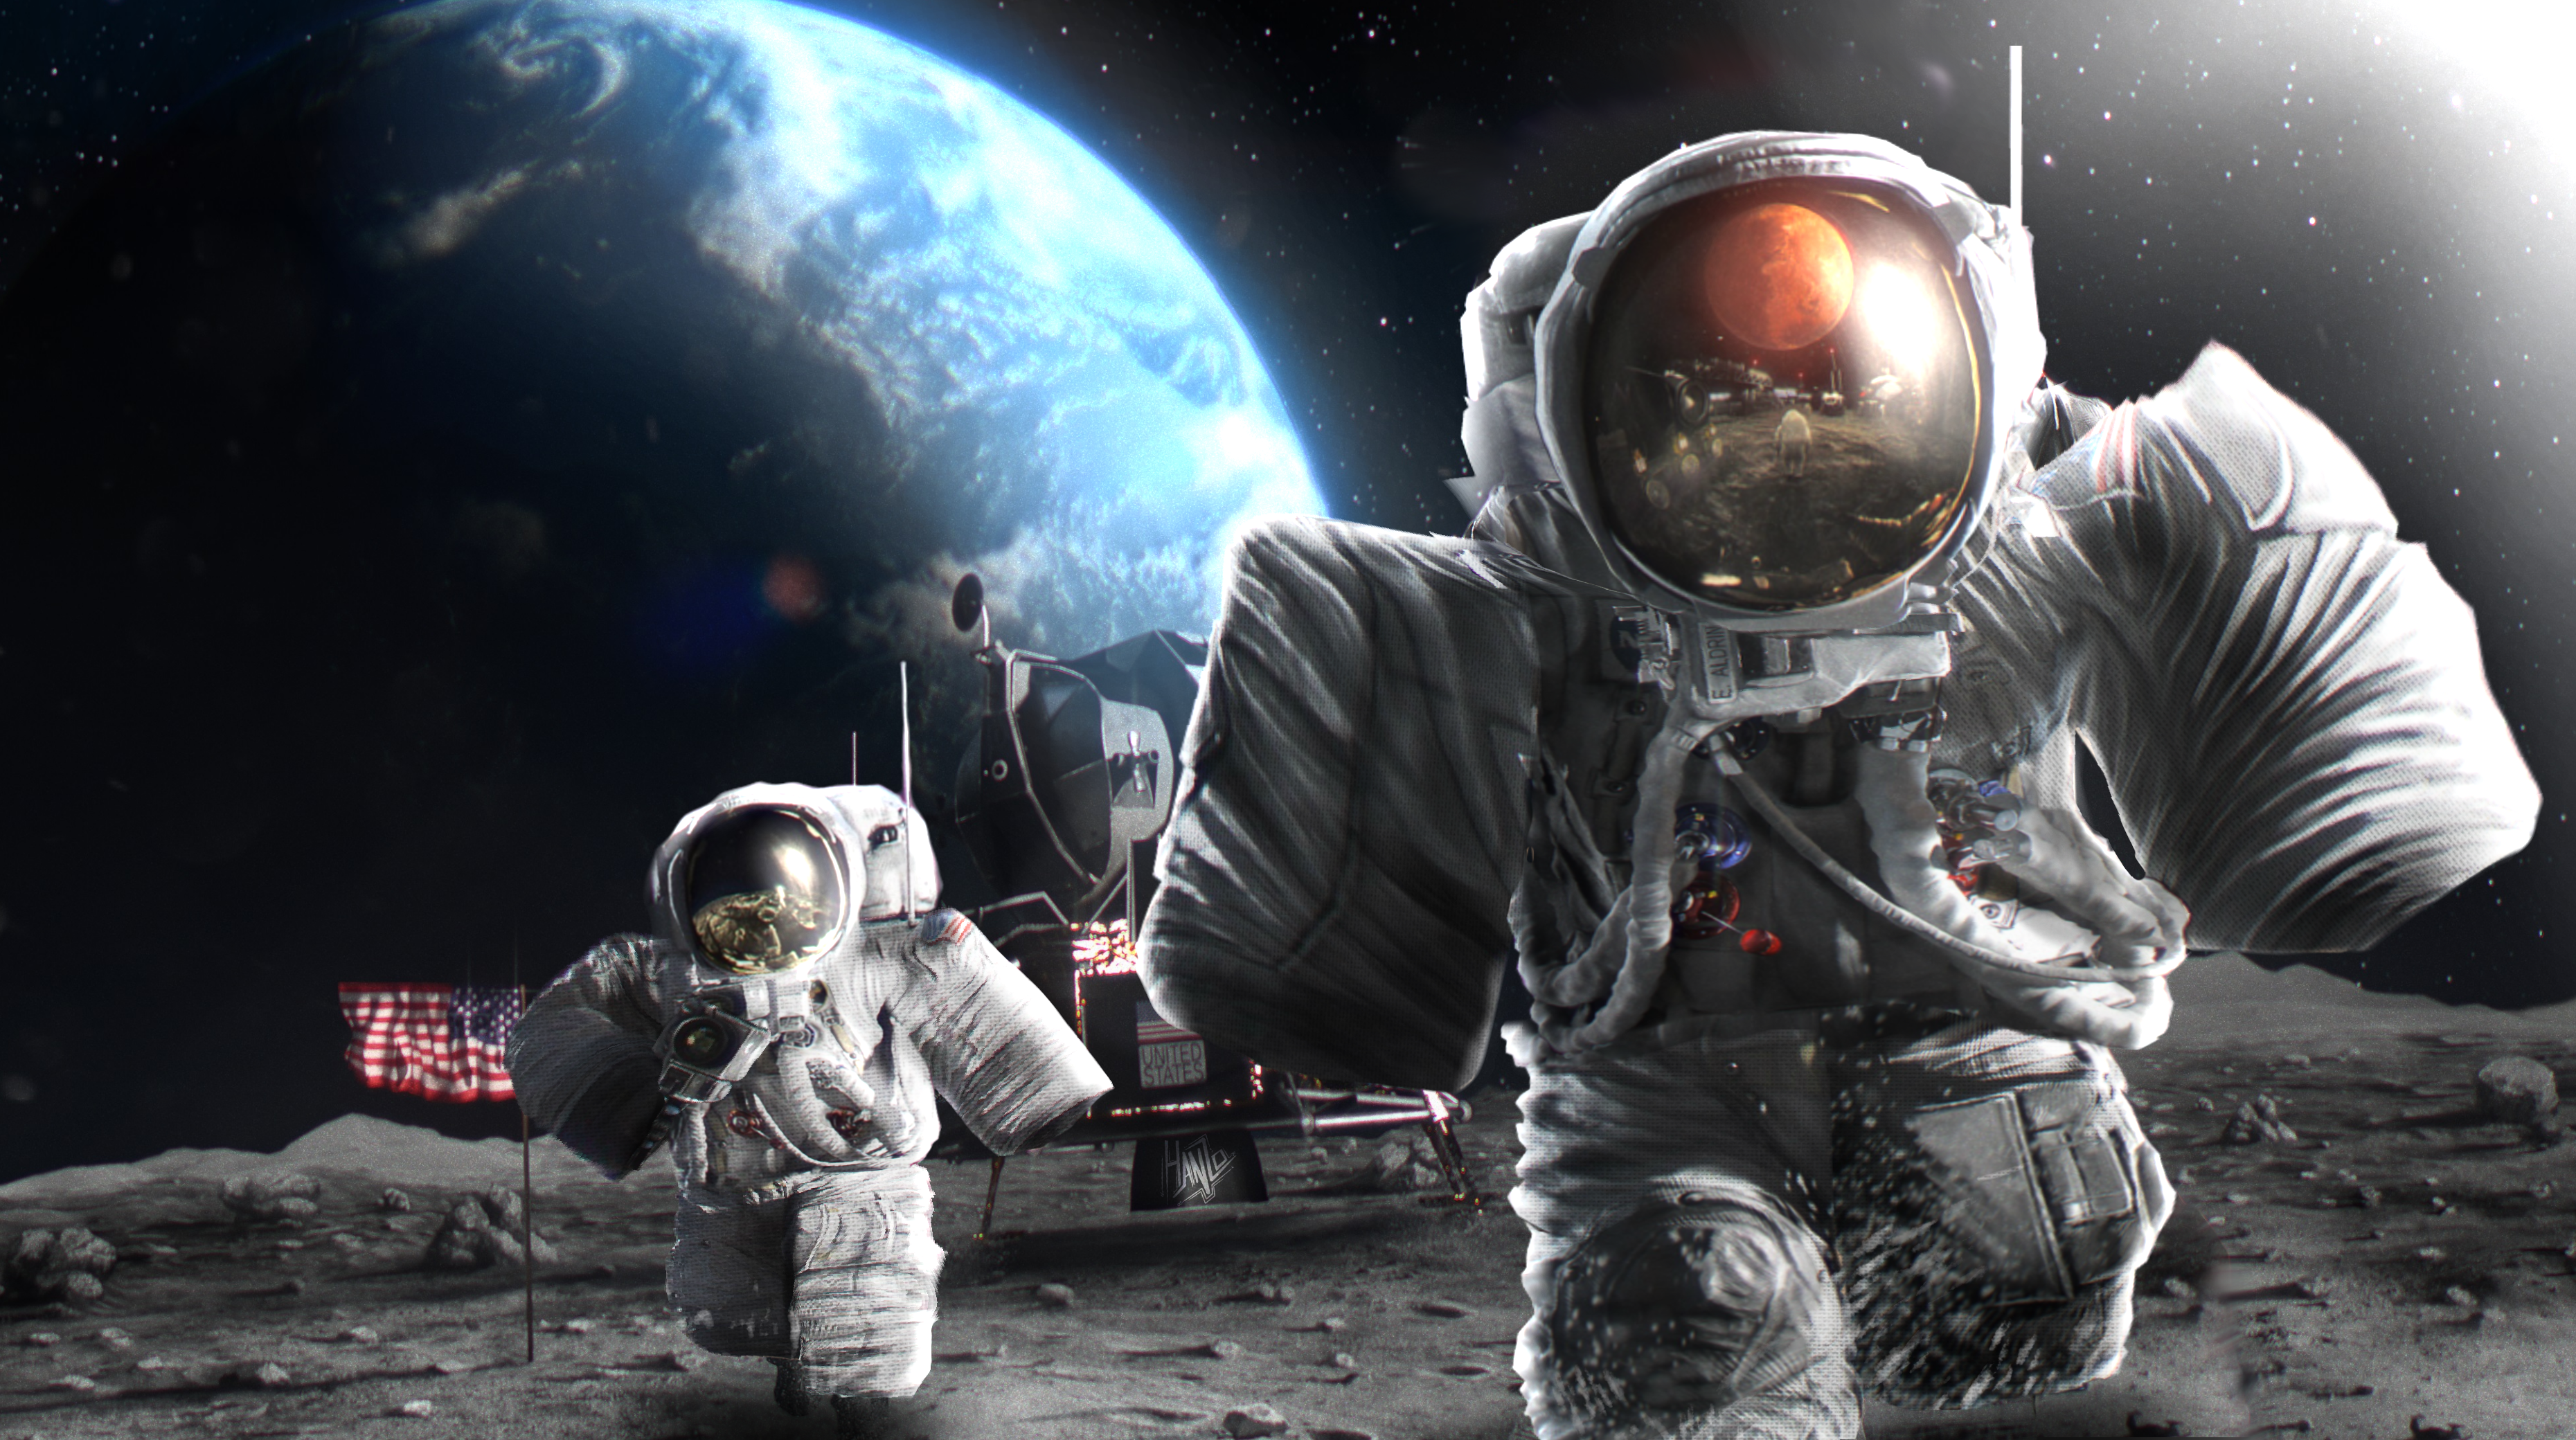 Austraunaut On The Moon Roblox Gfx By Hanzogfx On Deviantart - roblox astronaut package